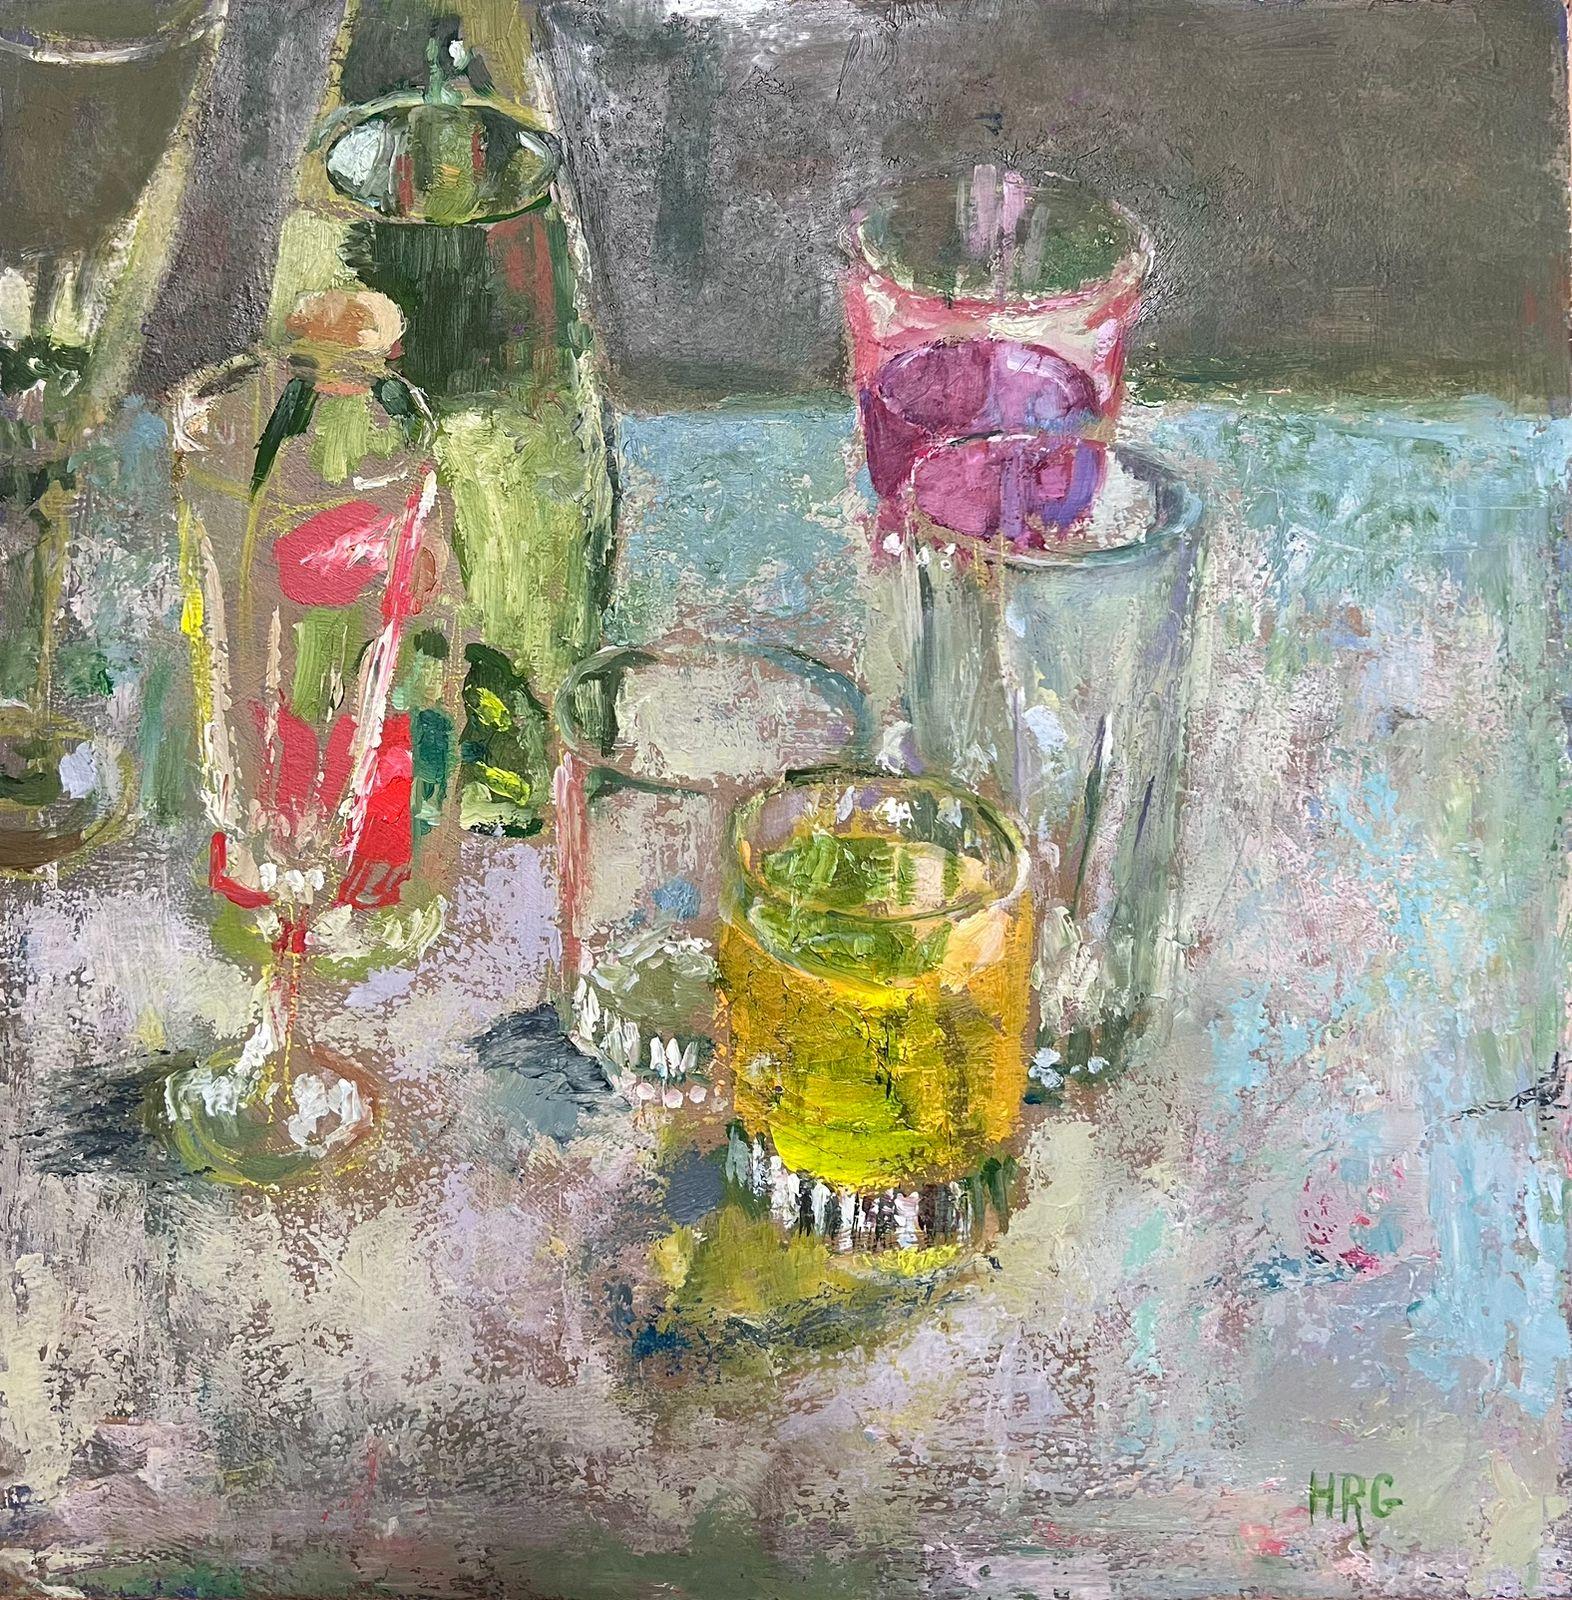 'The Party's Over'
by Helen Greenfield (British 20th century)
signed initials oil painting on board, unframed
board: 16 x 16 inches
condition: overall very good
provenance: all the paintings we have by this artist have come from their studio sale in